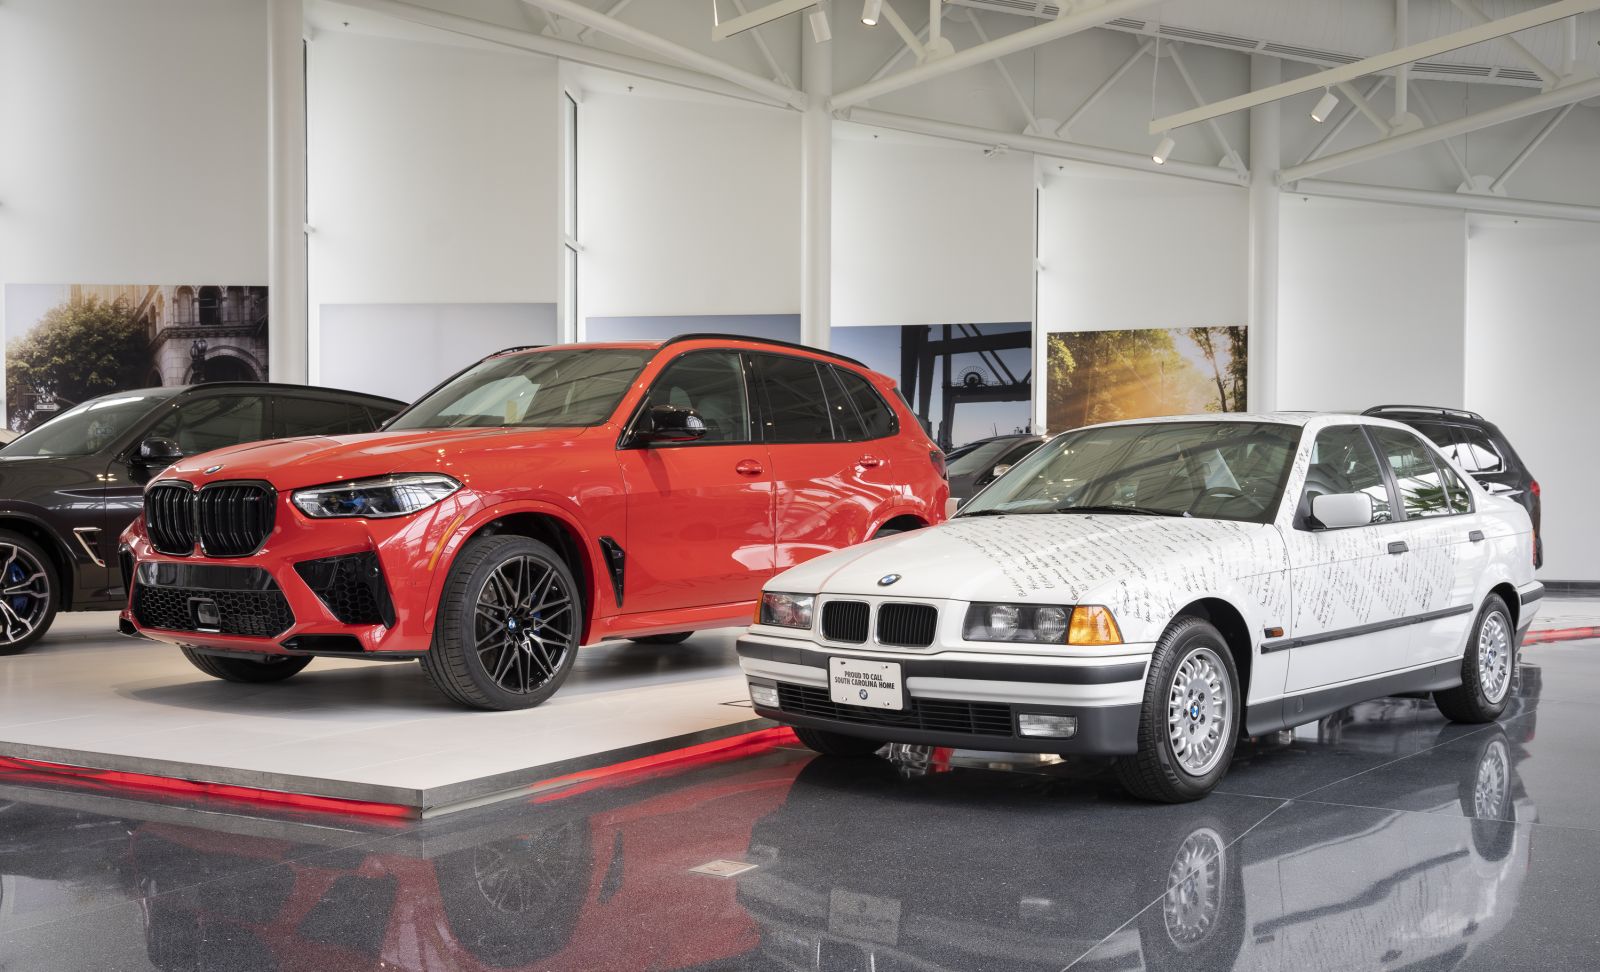 The milestone U.S.-made BMW is a red X5 M Competition with a 617-horsepower engine. (Photo/Provided)